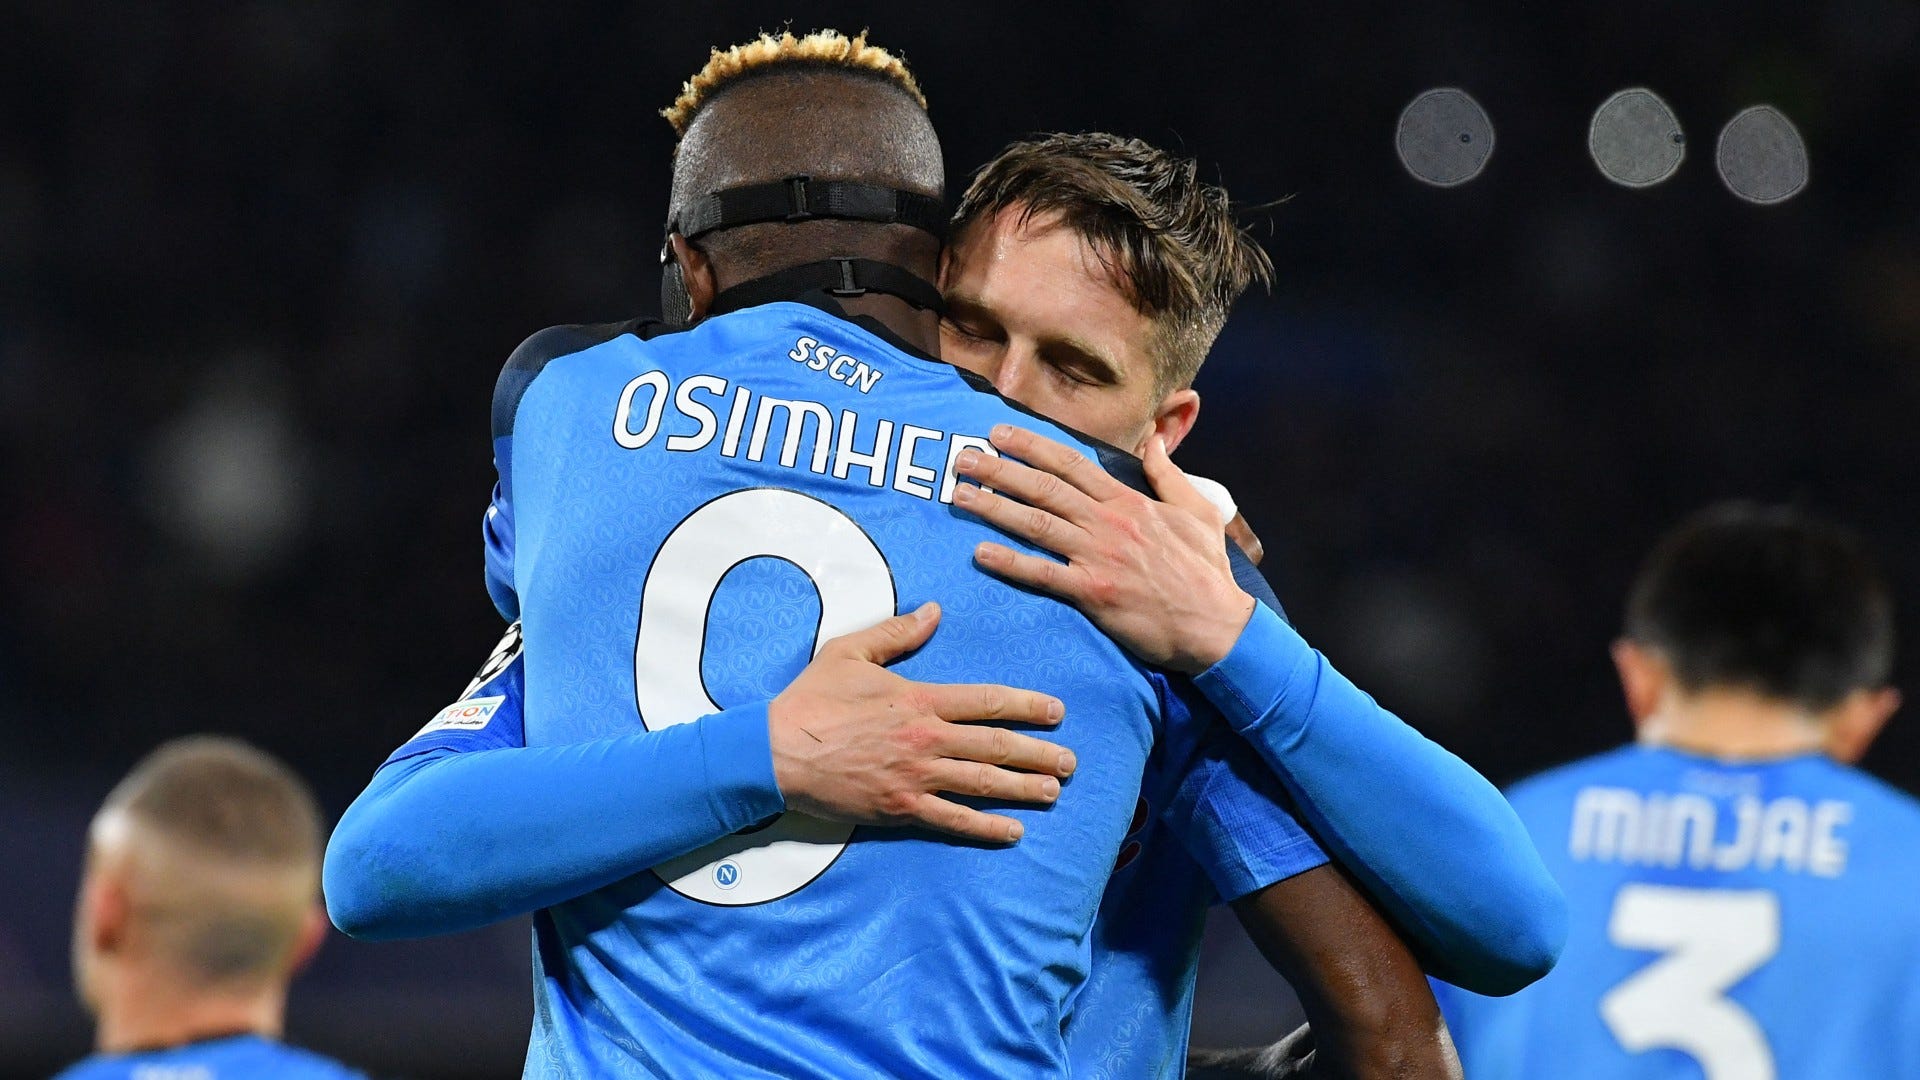 Nigerian stars dazzle: Osimhen grabs brace, Orban scores hat-trick as  Napoli and Gent progress in Uefa competitions | Goal.com English Oman